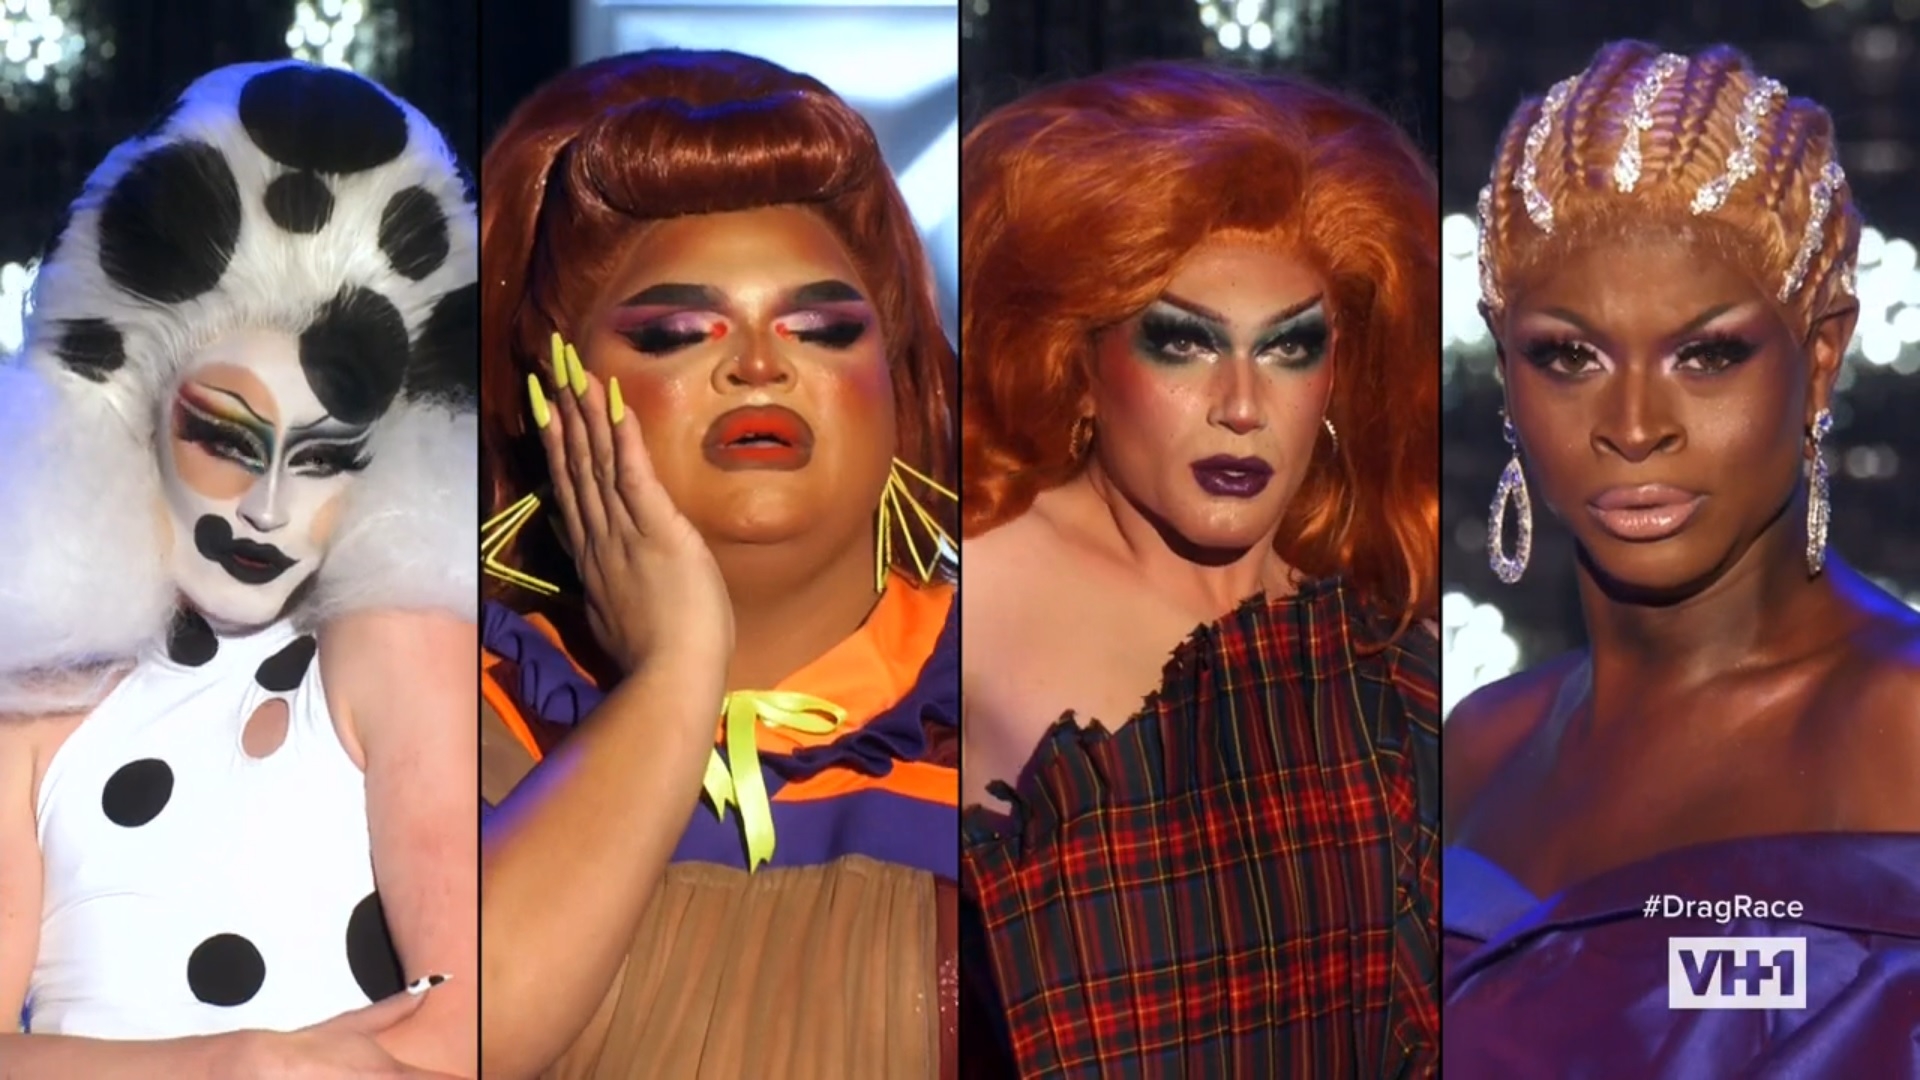 A catchy track and strong social game sends RuPaul’s Drag Race into its finale in style